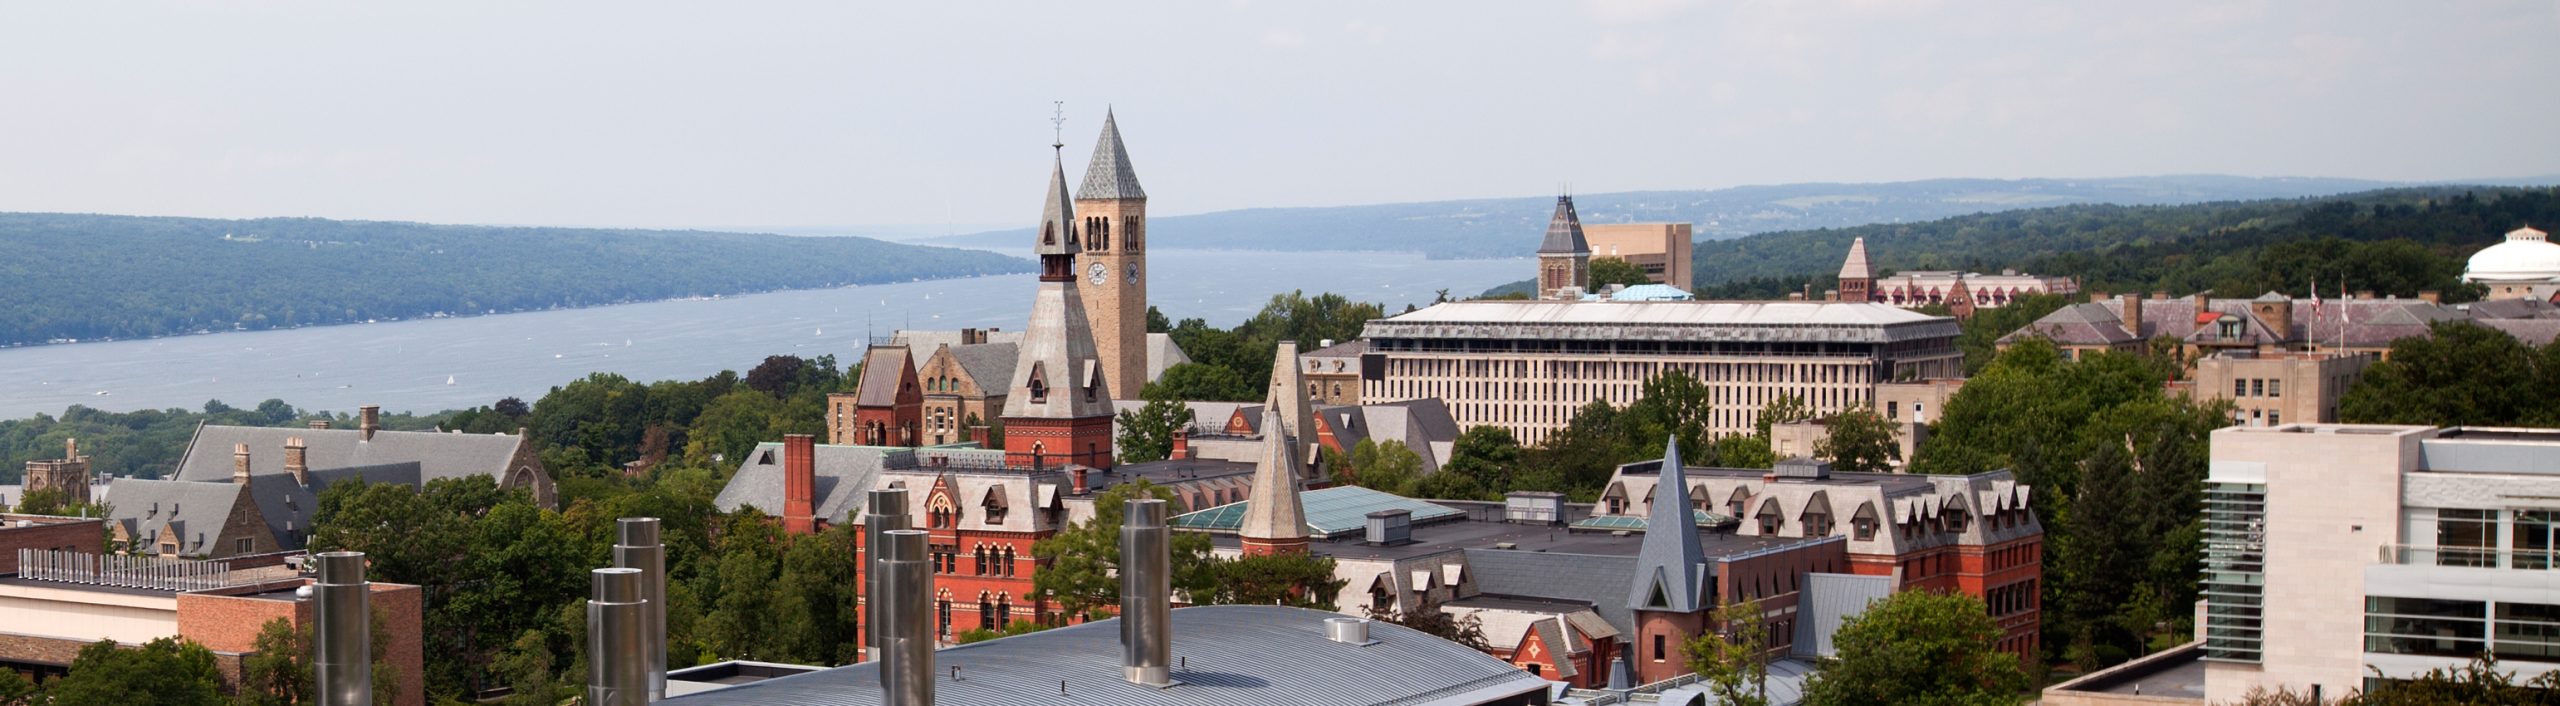 Cornell University, Ithaca NY - The Cornell Real Estate Council